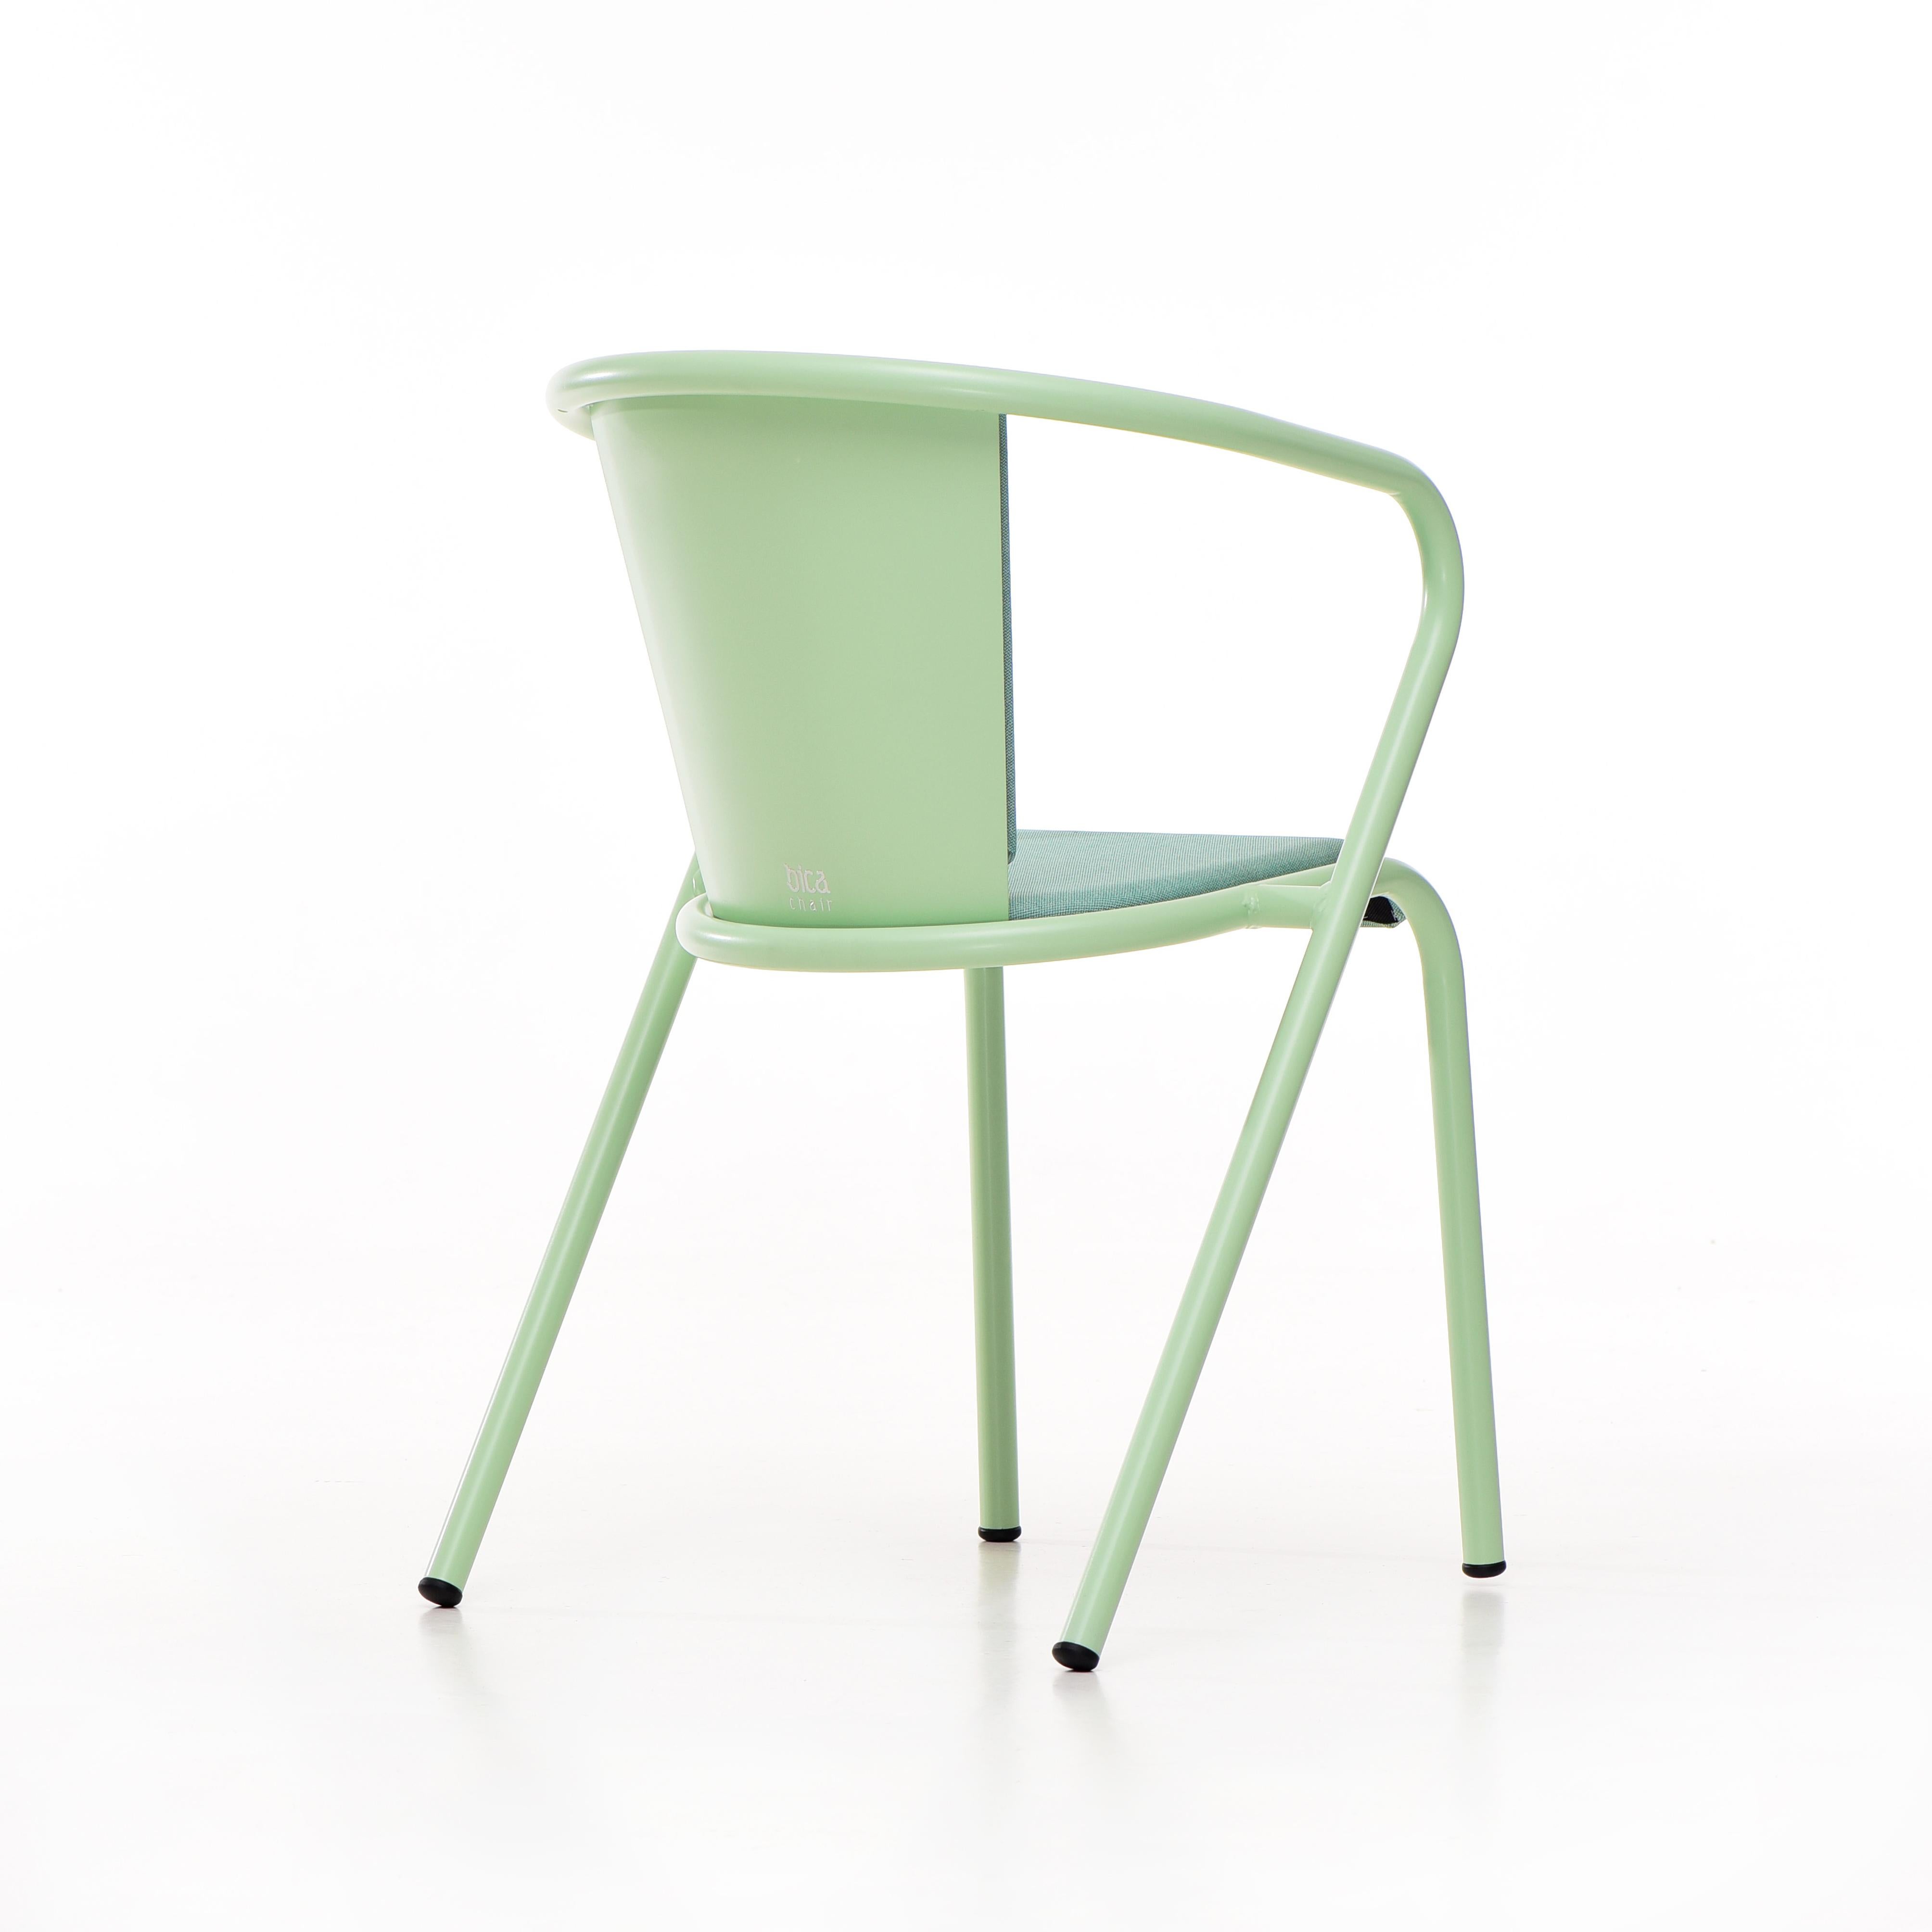 Portuguese BICAchair Modern Steel Armchair Pastel Green, Upholstery in Eco-Fabric For Sale